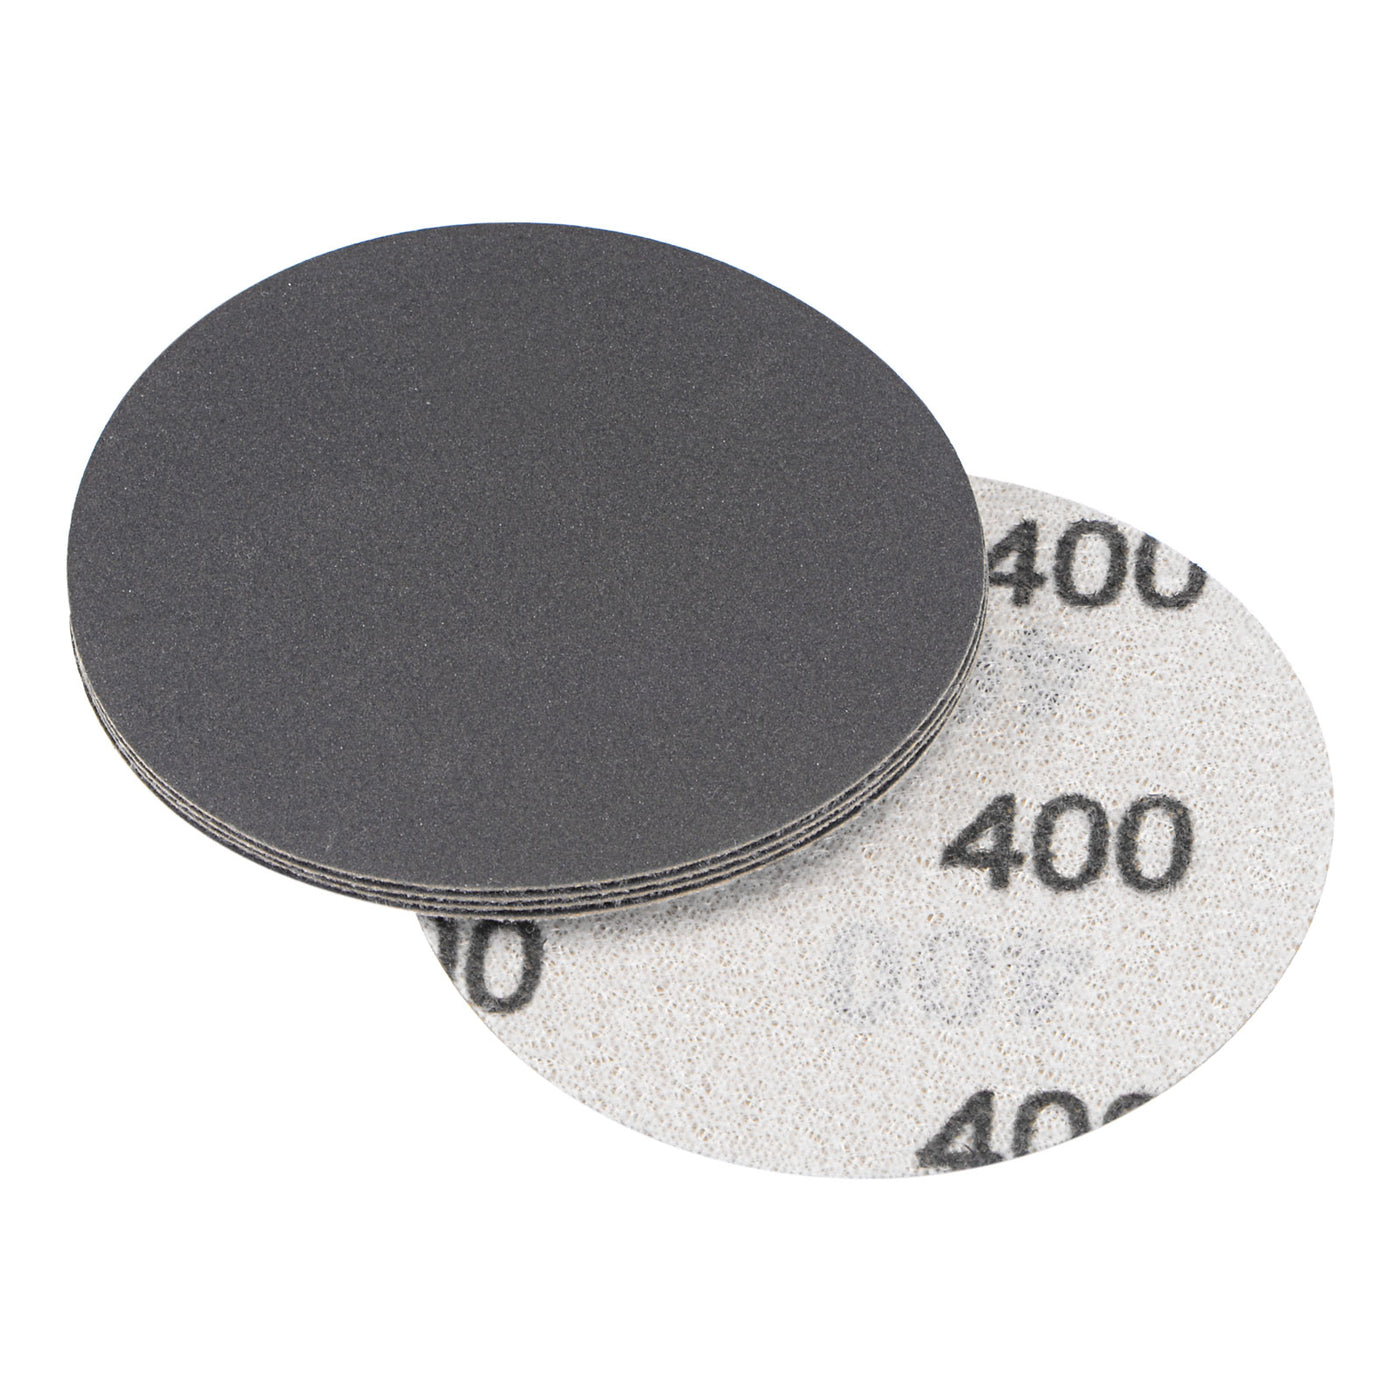 Uxcell Uxcell 3 Inch 1500 Grit Sanding Discs Wet/Dry Hook and Loop Silicon Carbide Round 5Pcs